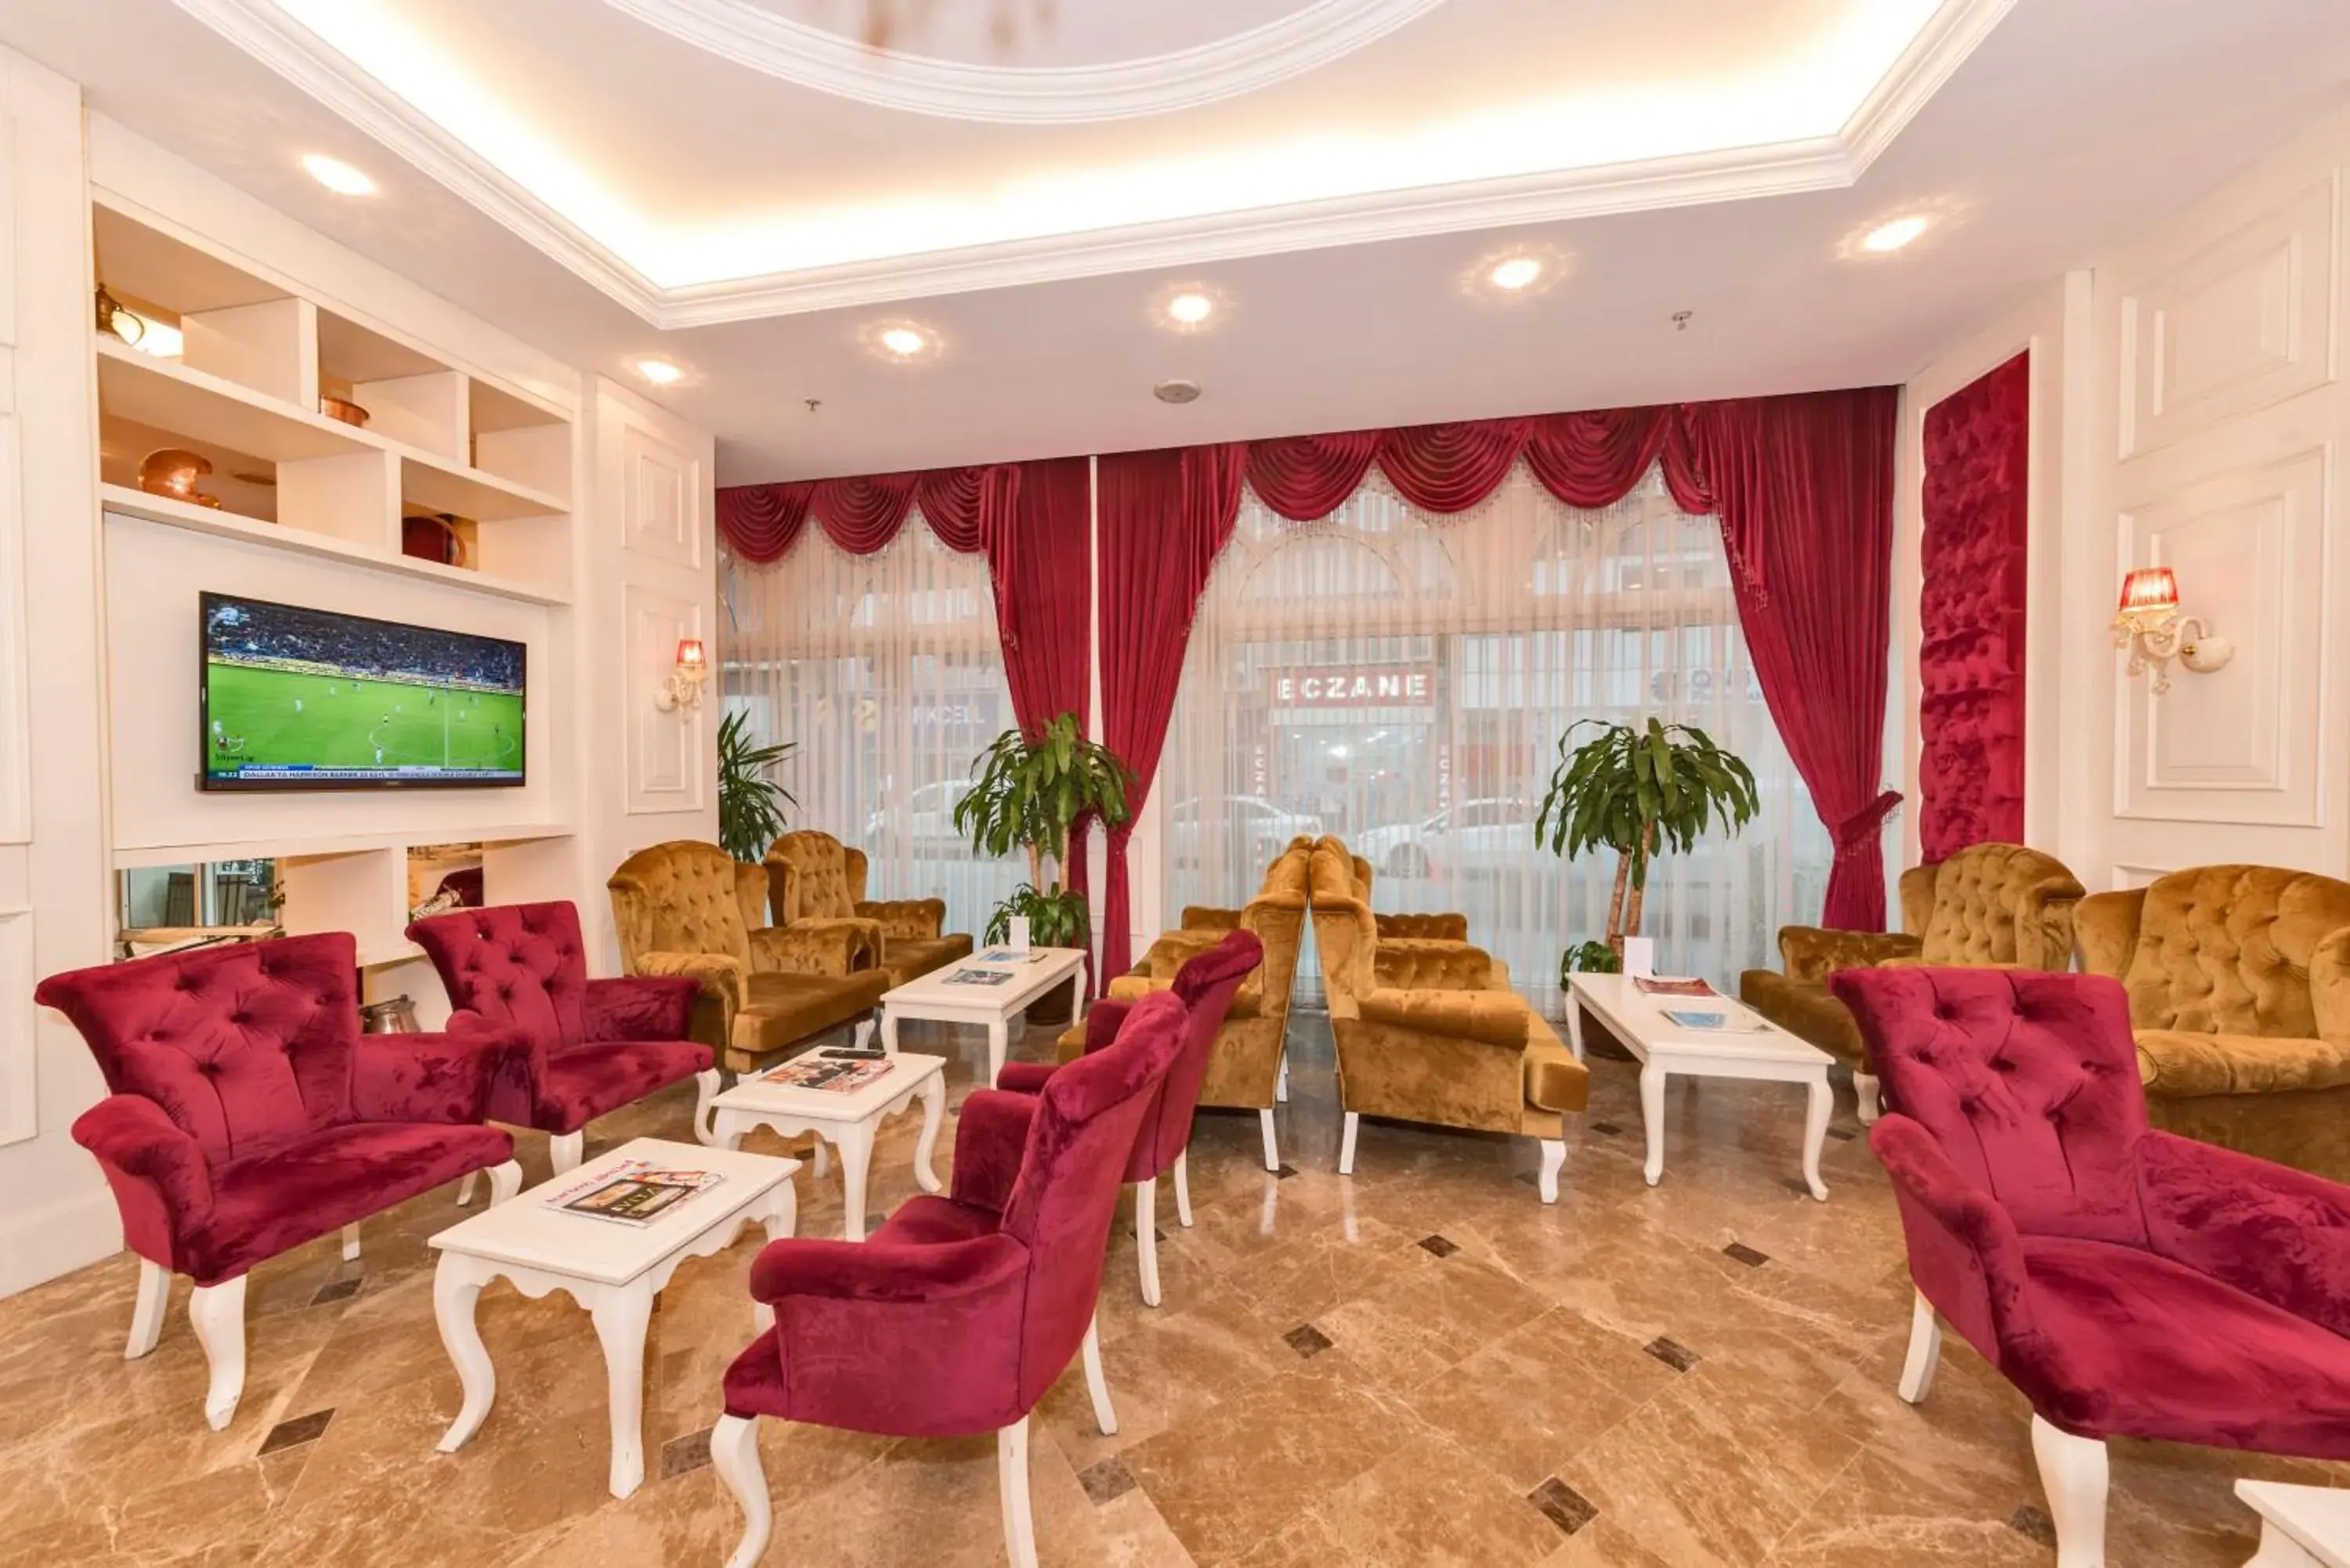 Lobby or reception in Marnas Hotels